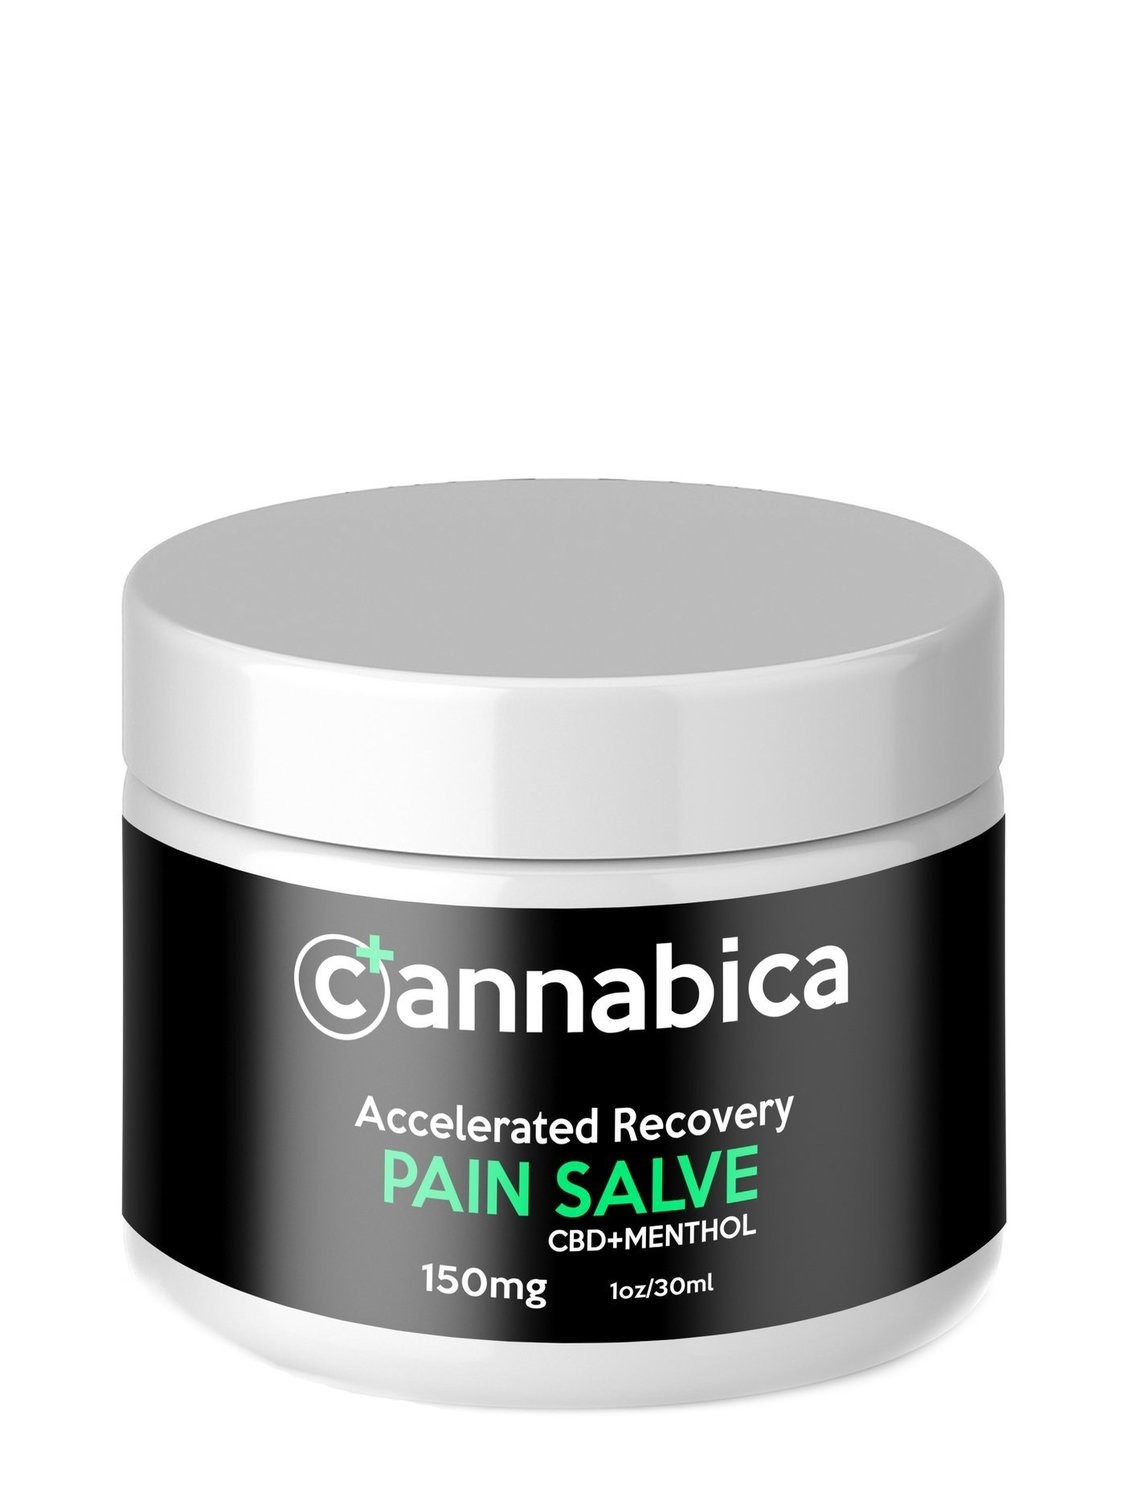 Accelerated Recovery Pain Salve